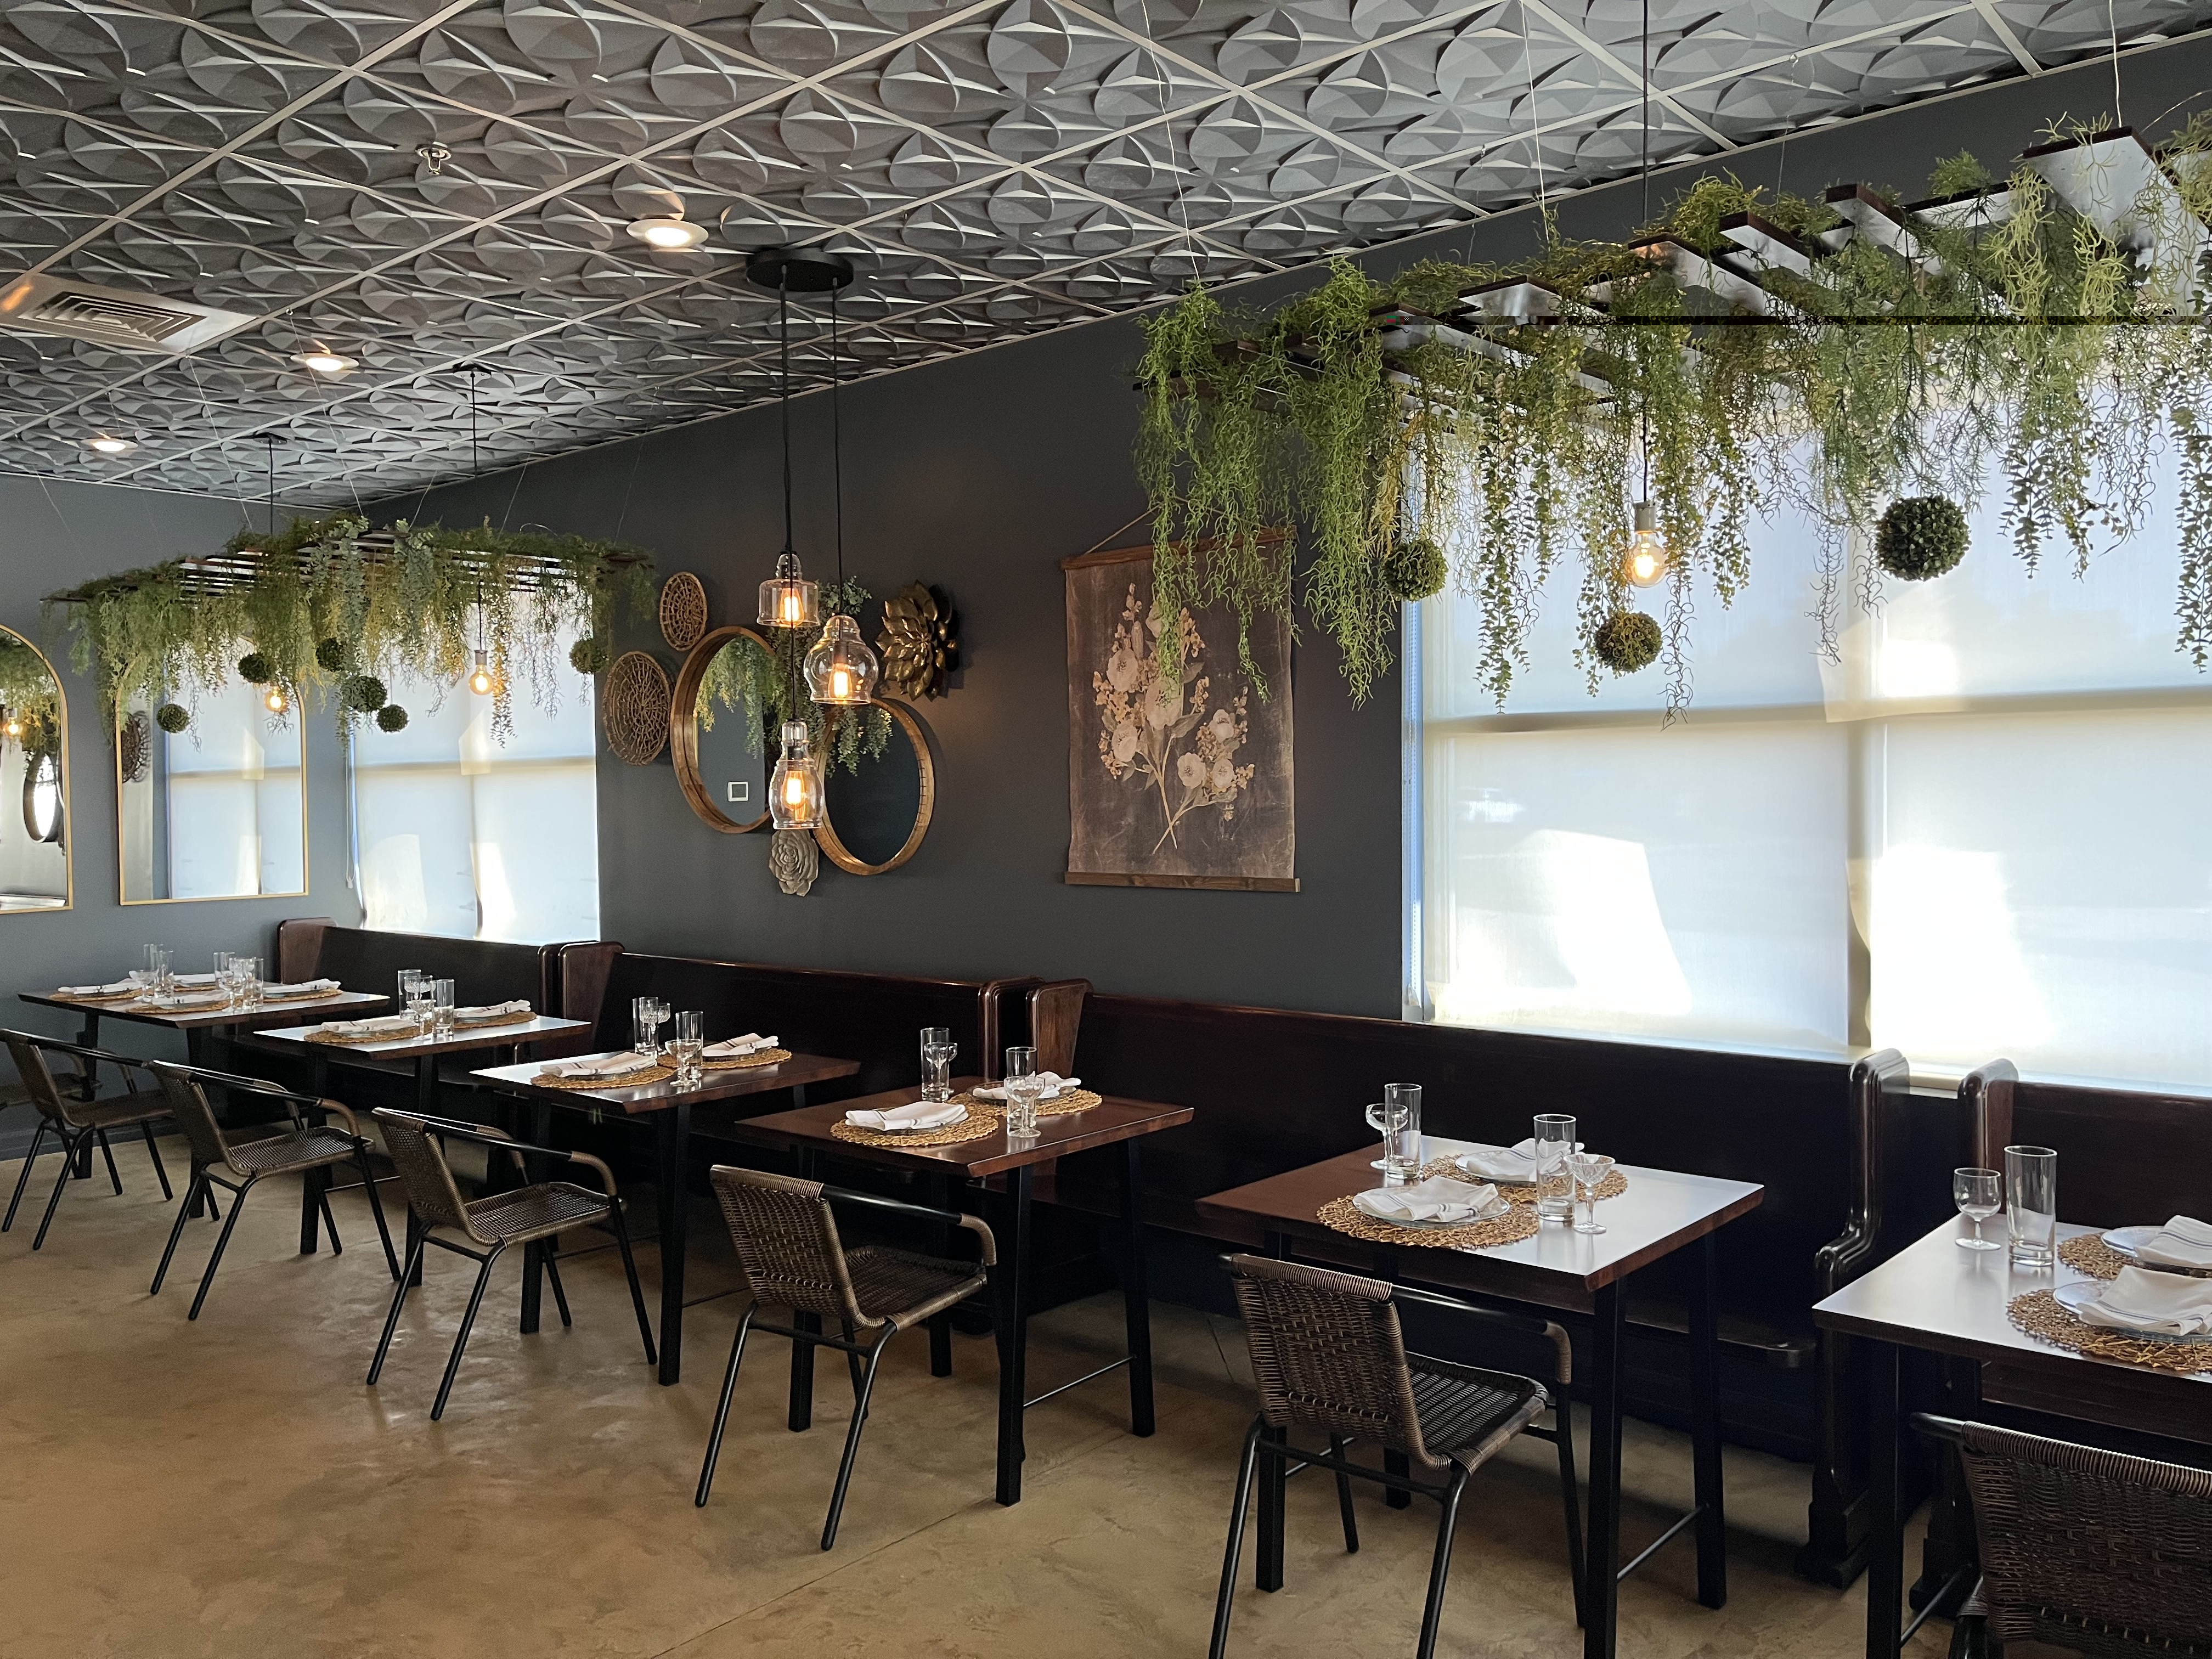 Interior photo of Amici, an Italian restaurant in south Springfield, showing tables lining a wall and baskets of ferns moss hanging from the ceiling